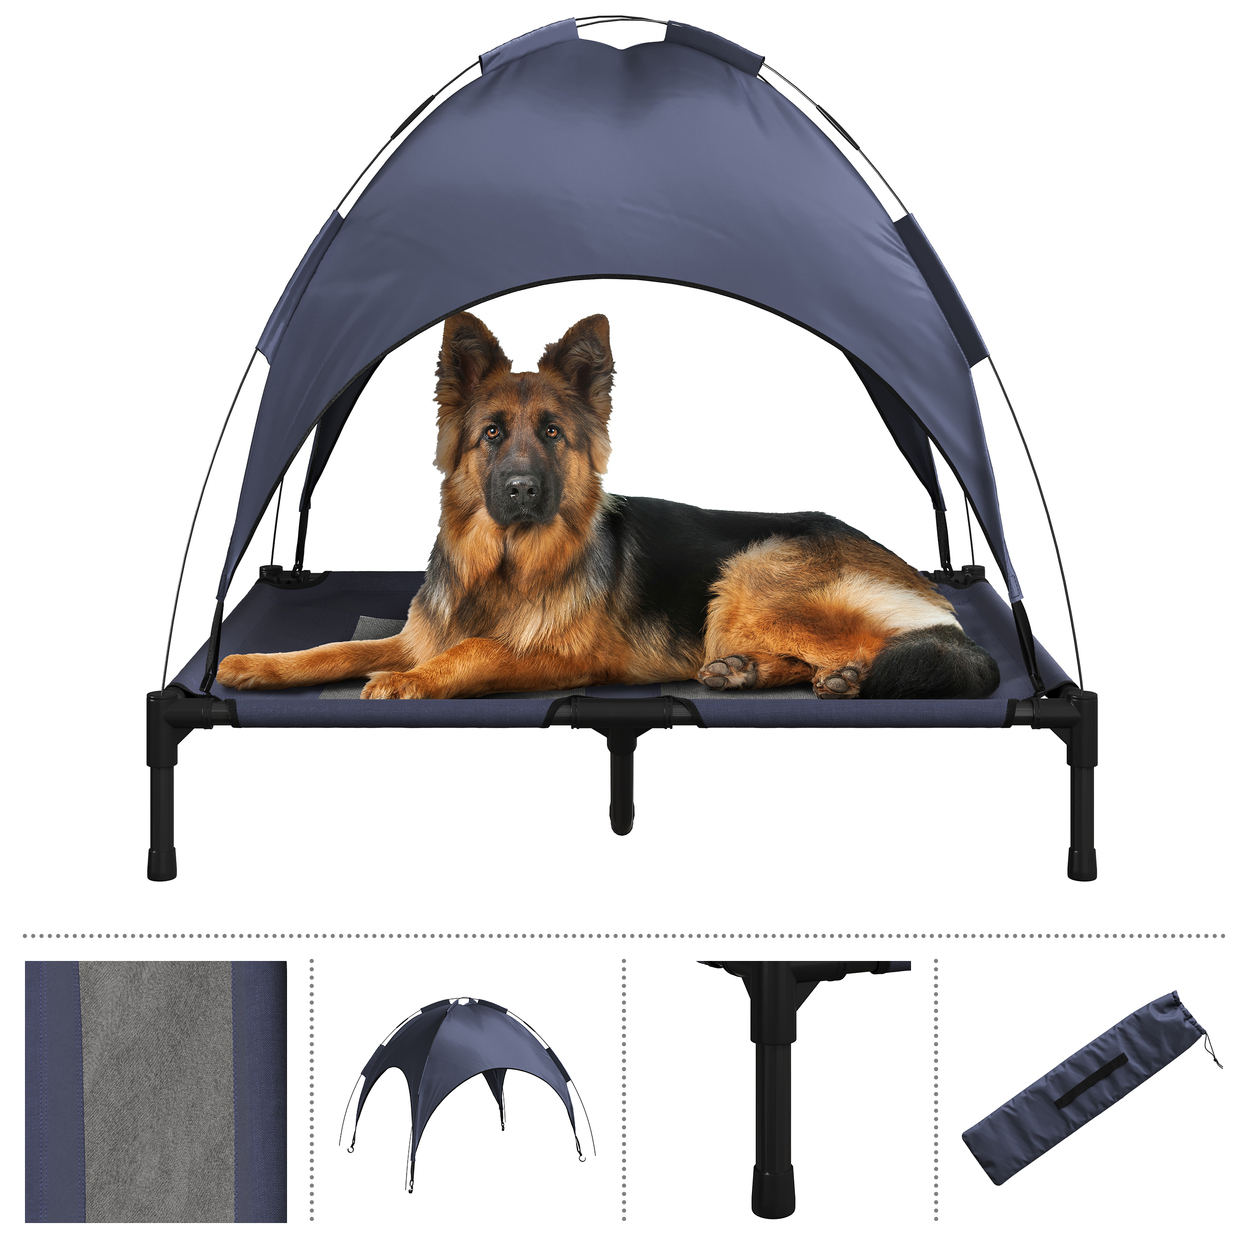 Elevated Dog Bed Canopy 36x30in Pet Bed Indoor/Outdoor Carrying Case, Blue